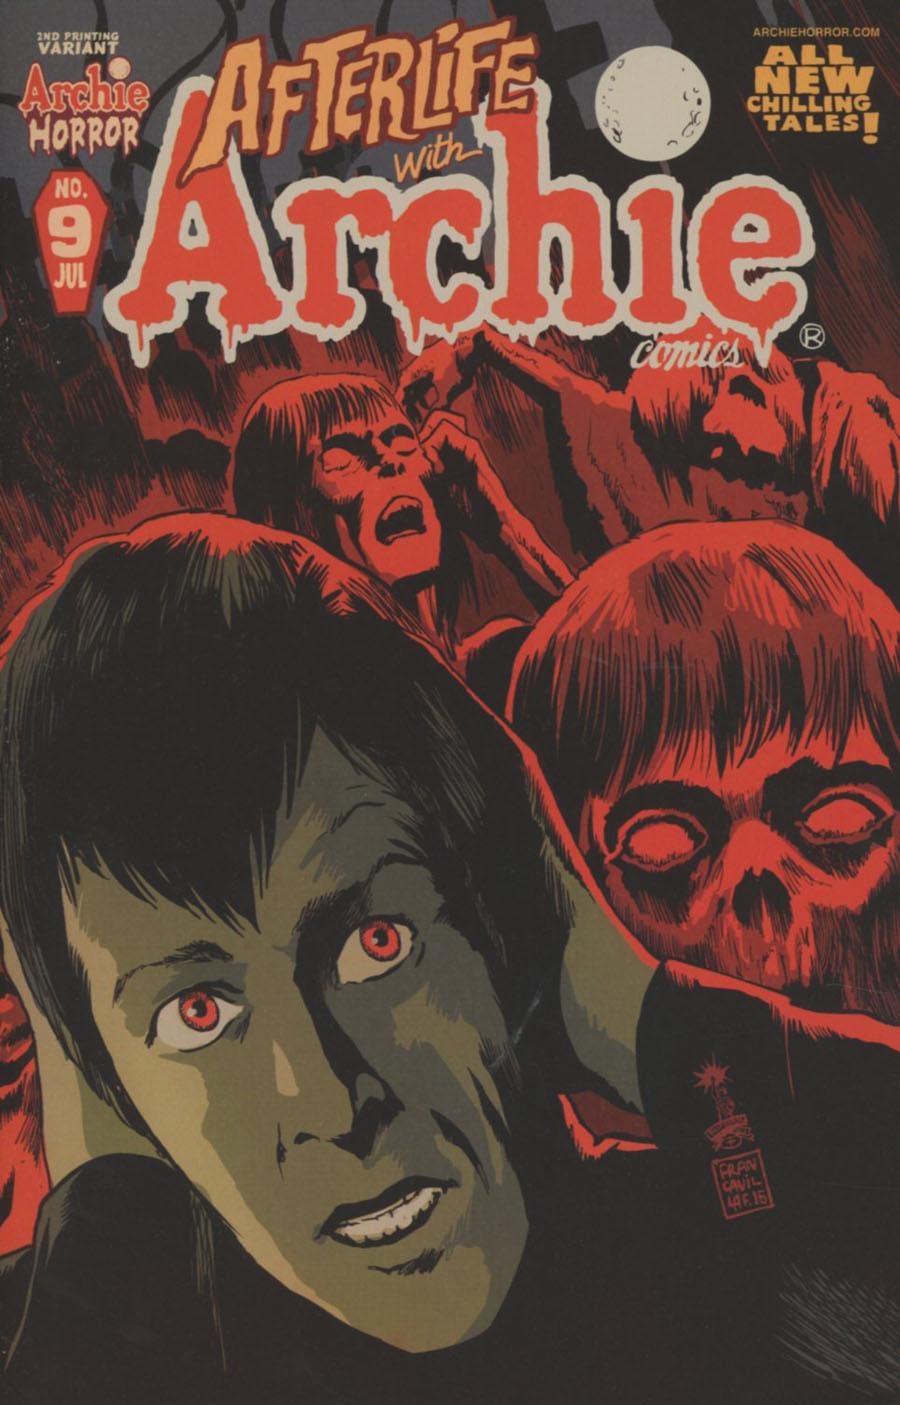 Afterlife With Archie Vol. 1 #9